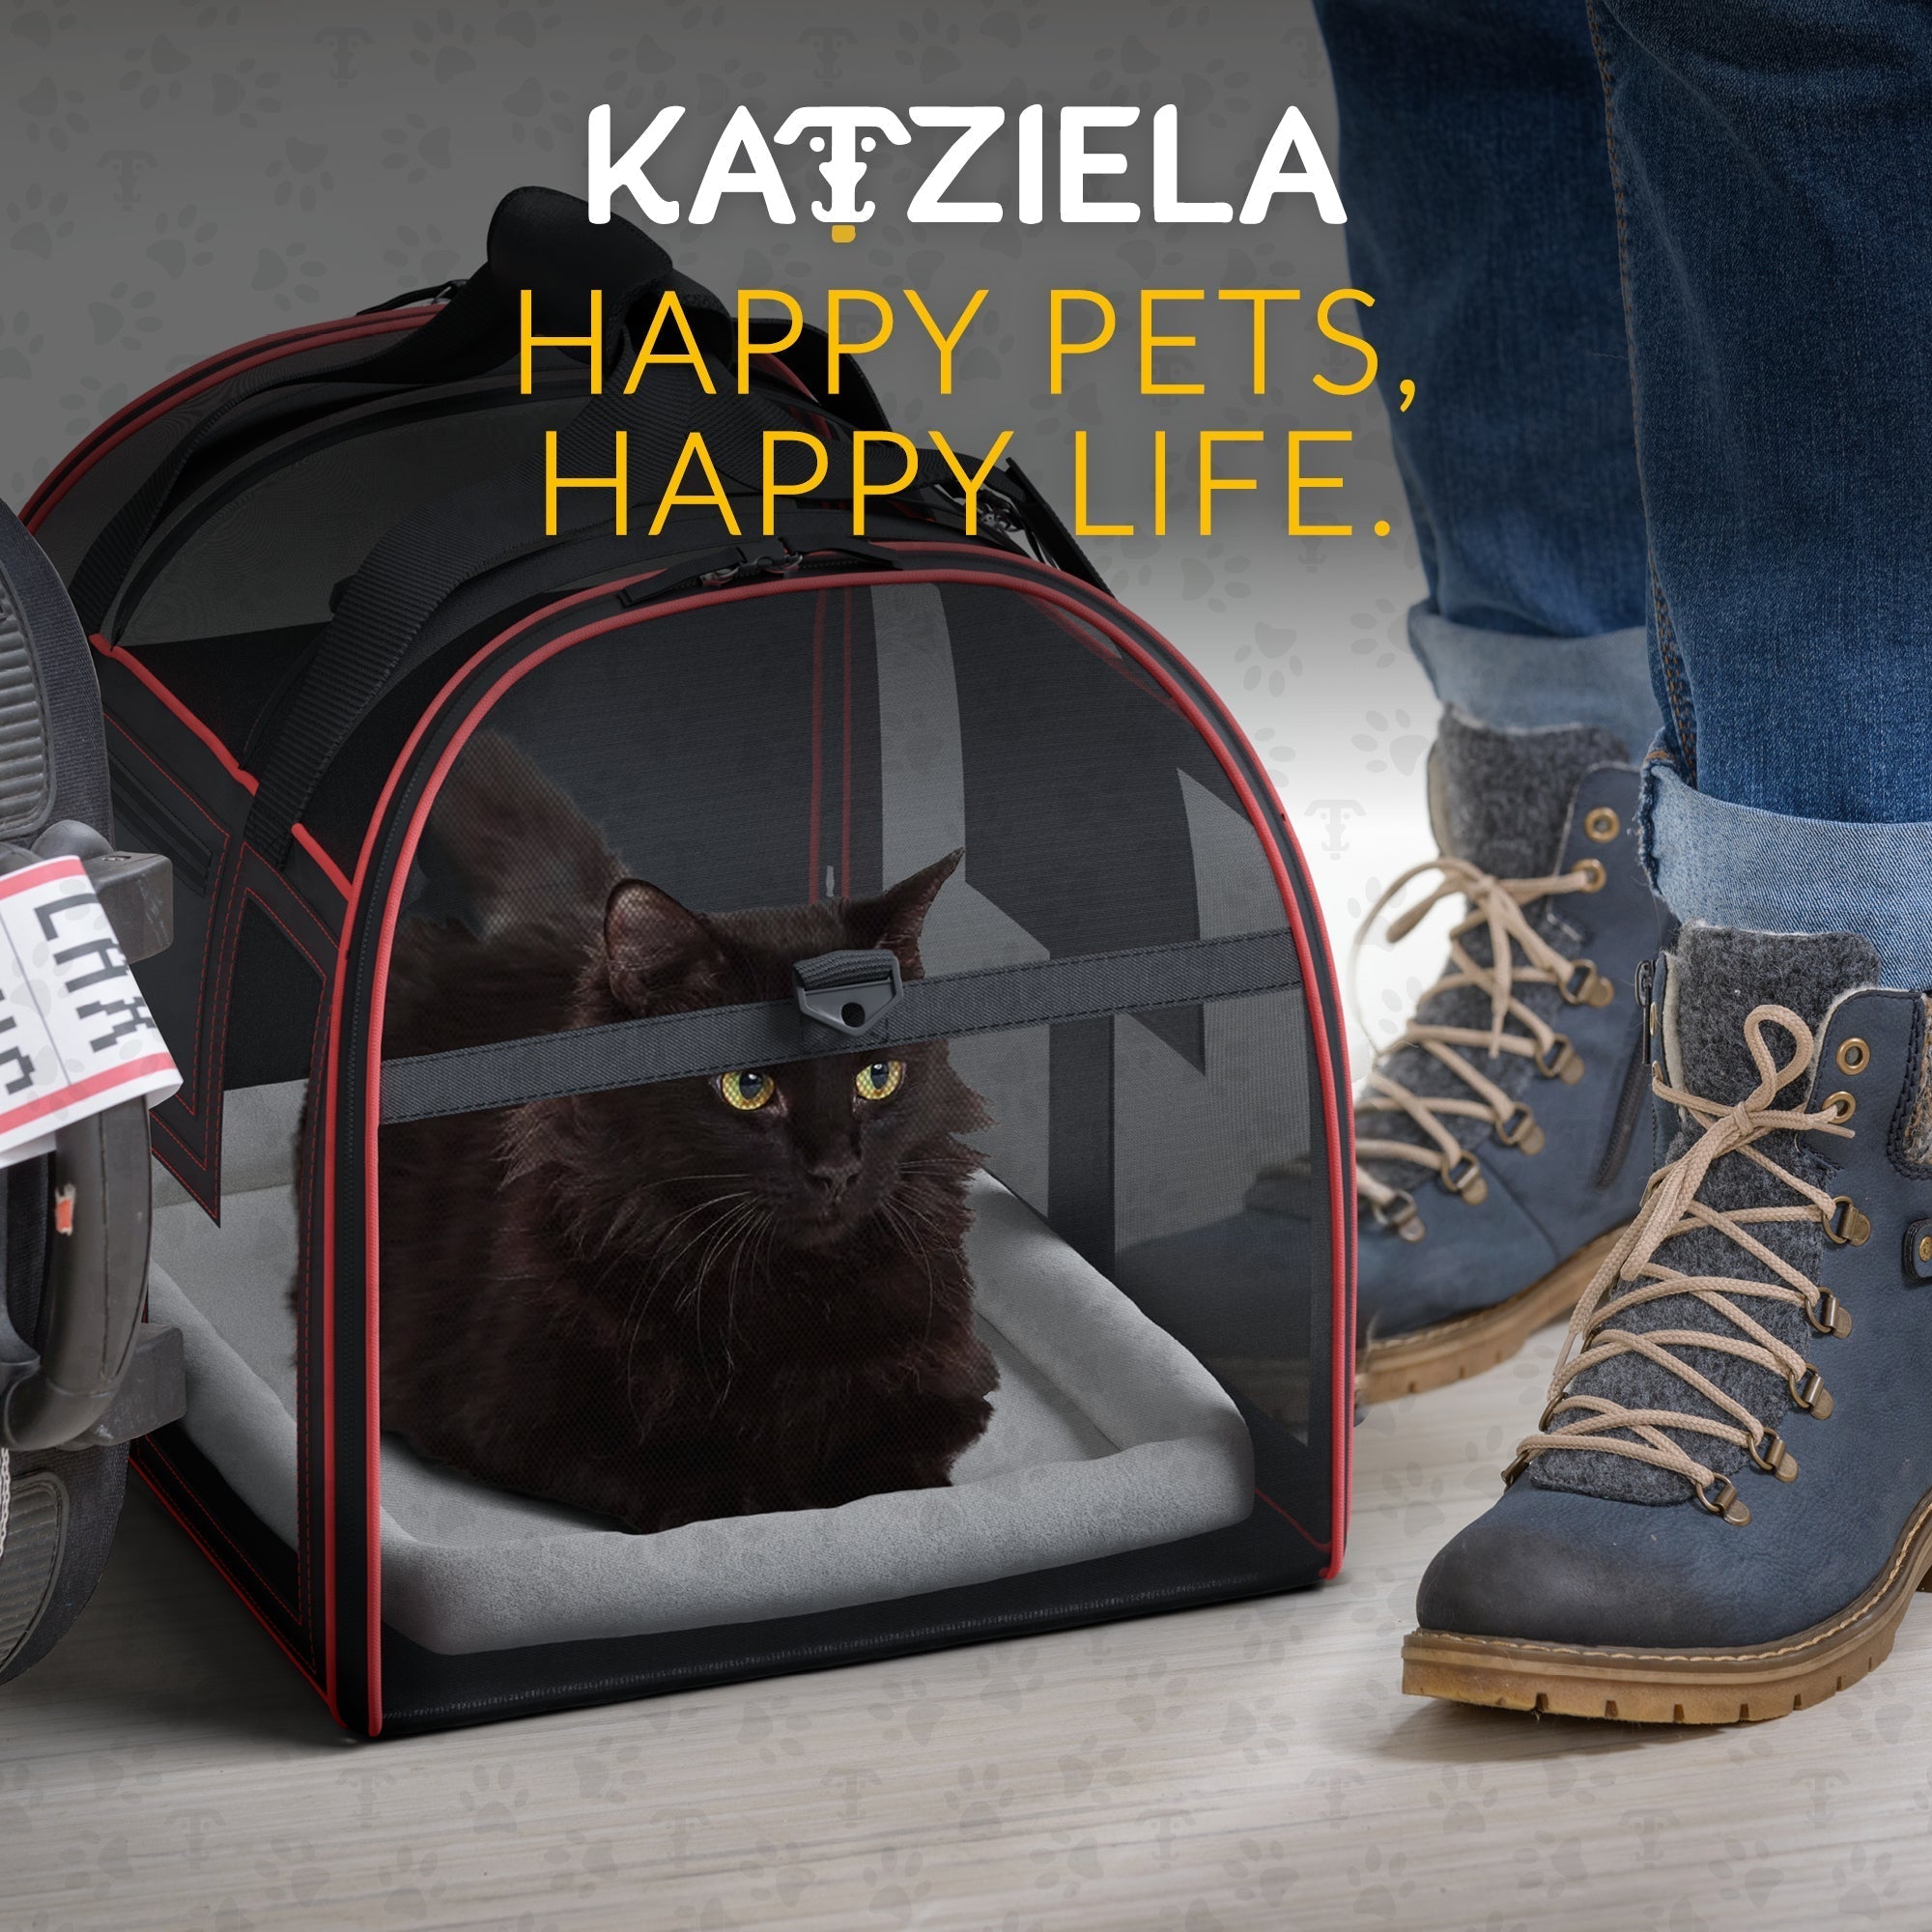 Katziela® Luxury Lorry PRO Pet Carrier with Removable Wheels and Telescopic Handle